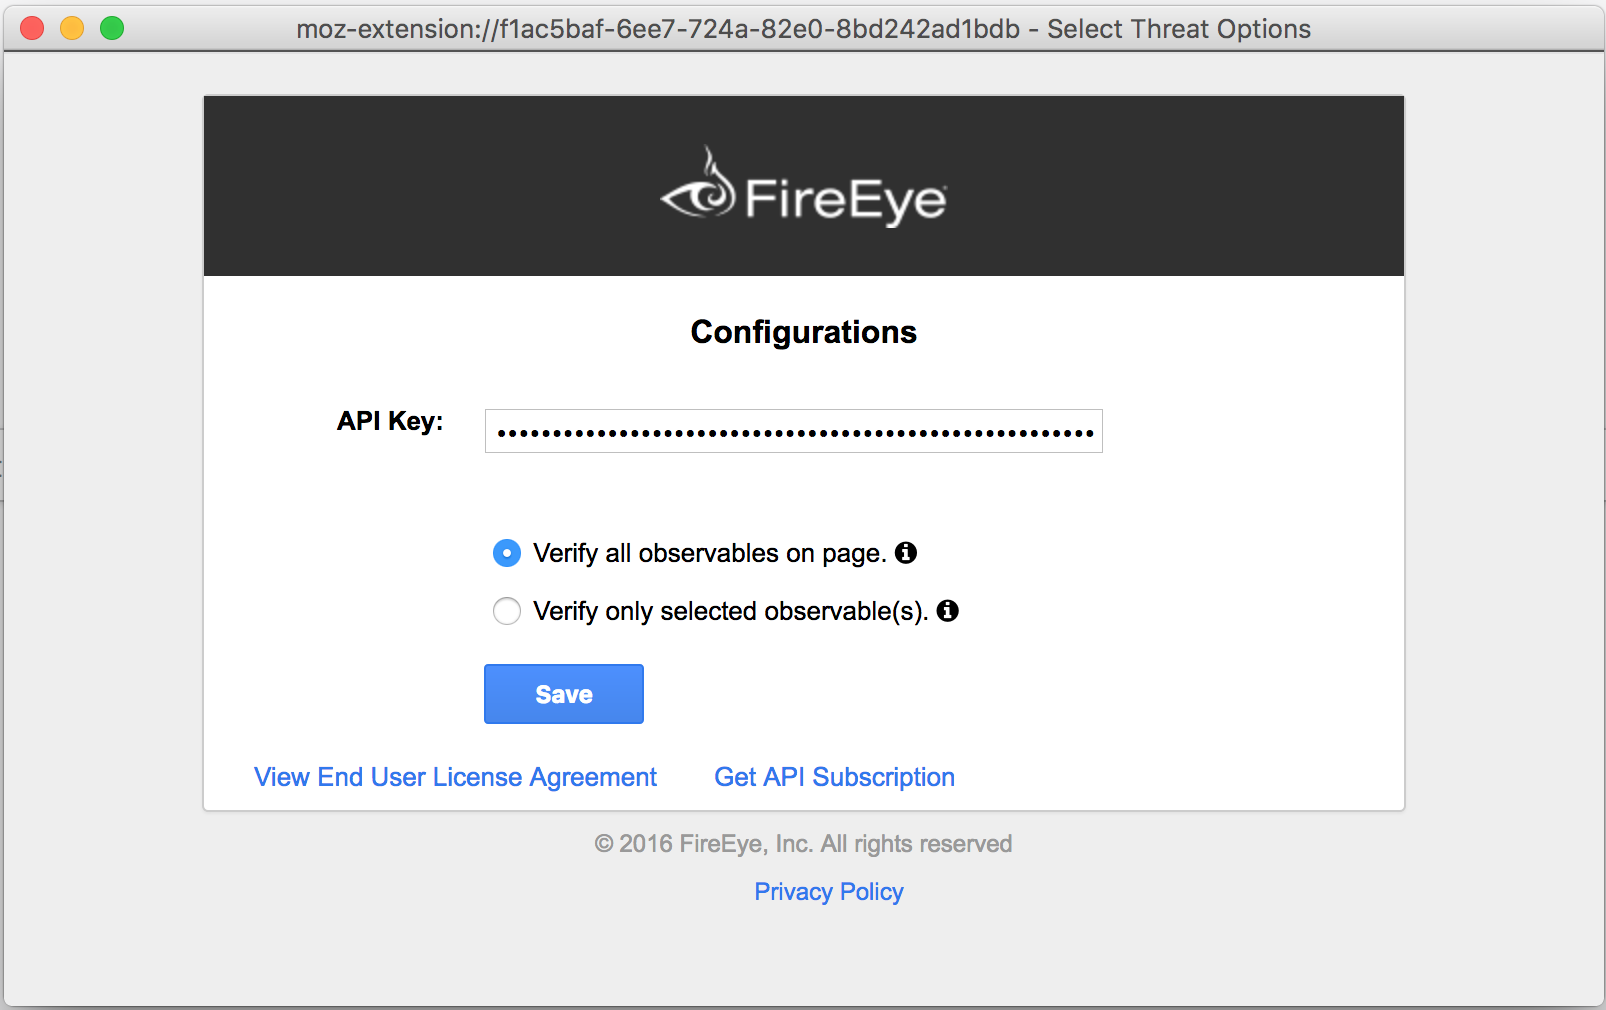 FireEye iSIGHT Browser Extension